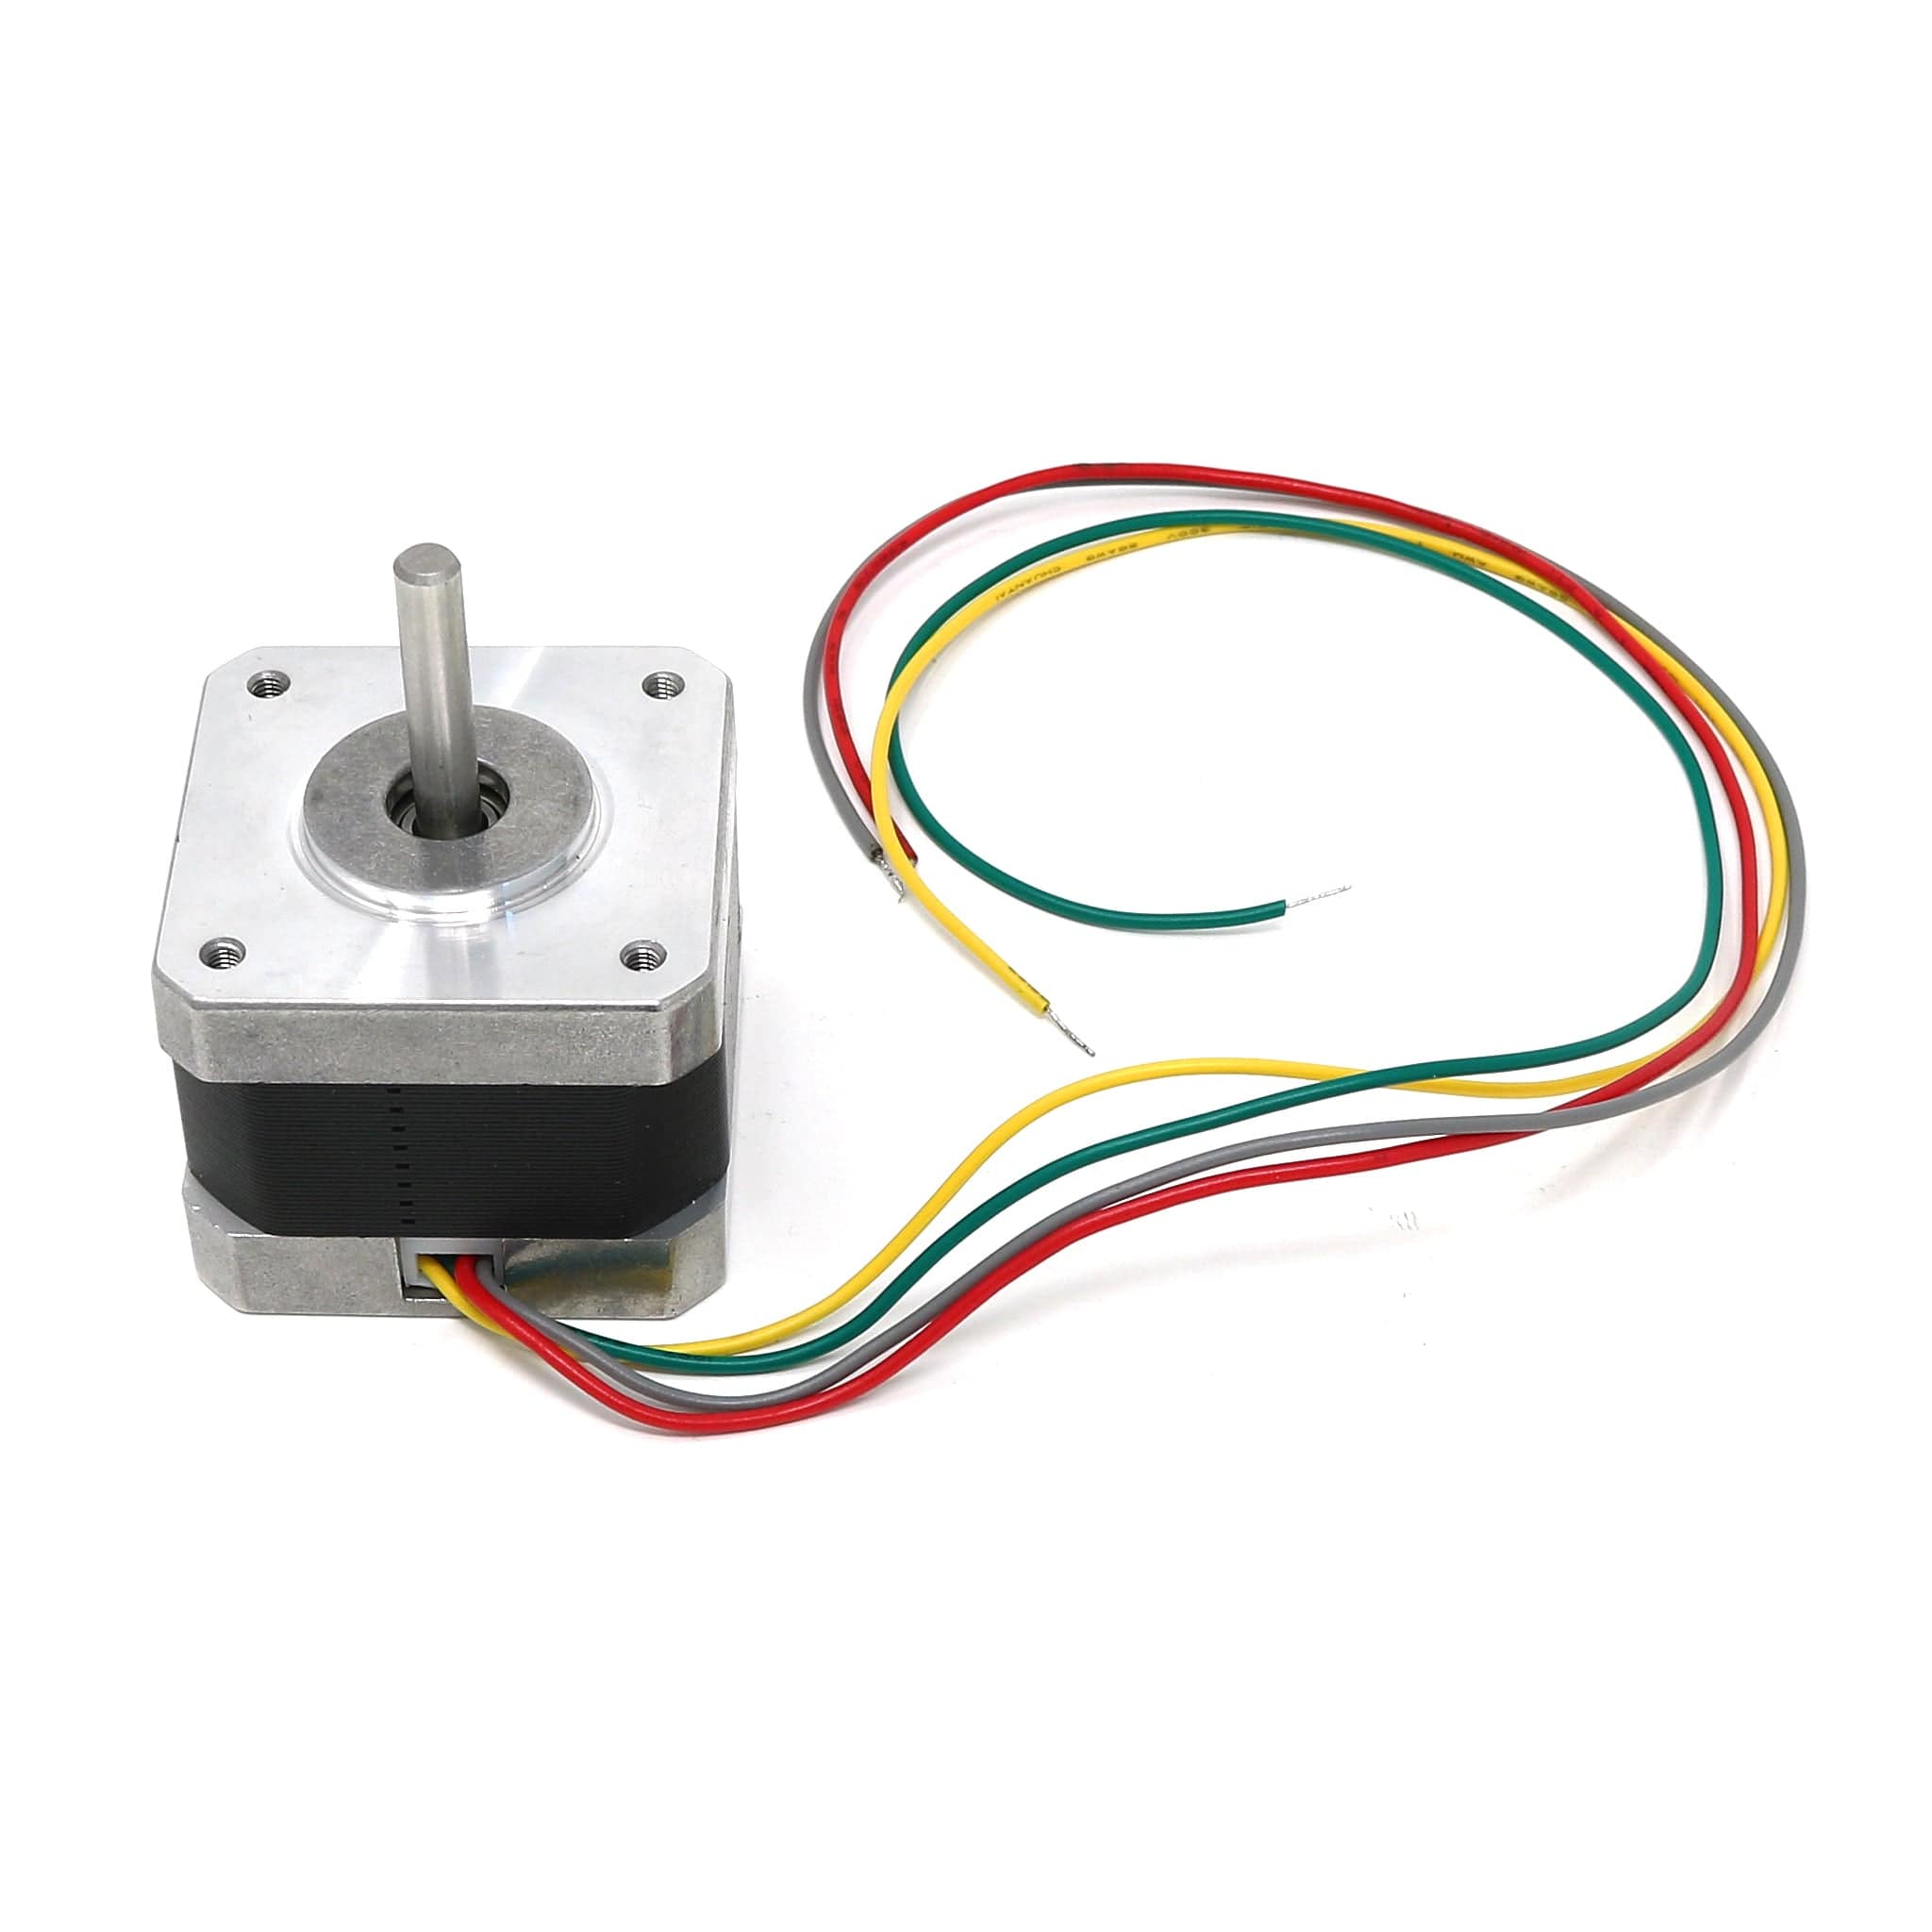 NEMA 17 Stepper Motor - 42mm x 34mm (with bare wires)